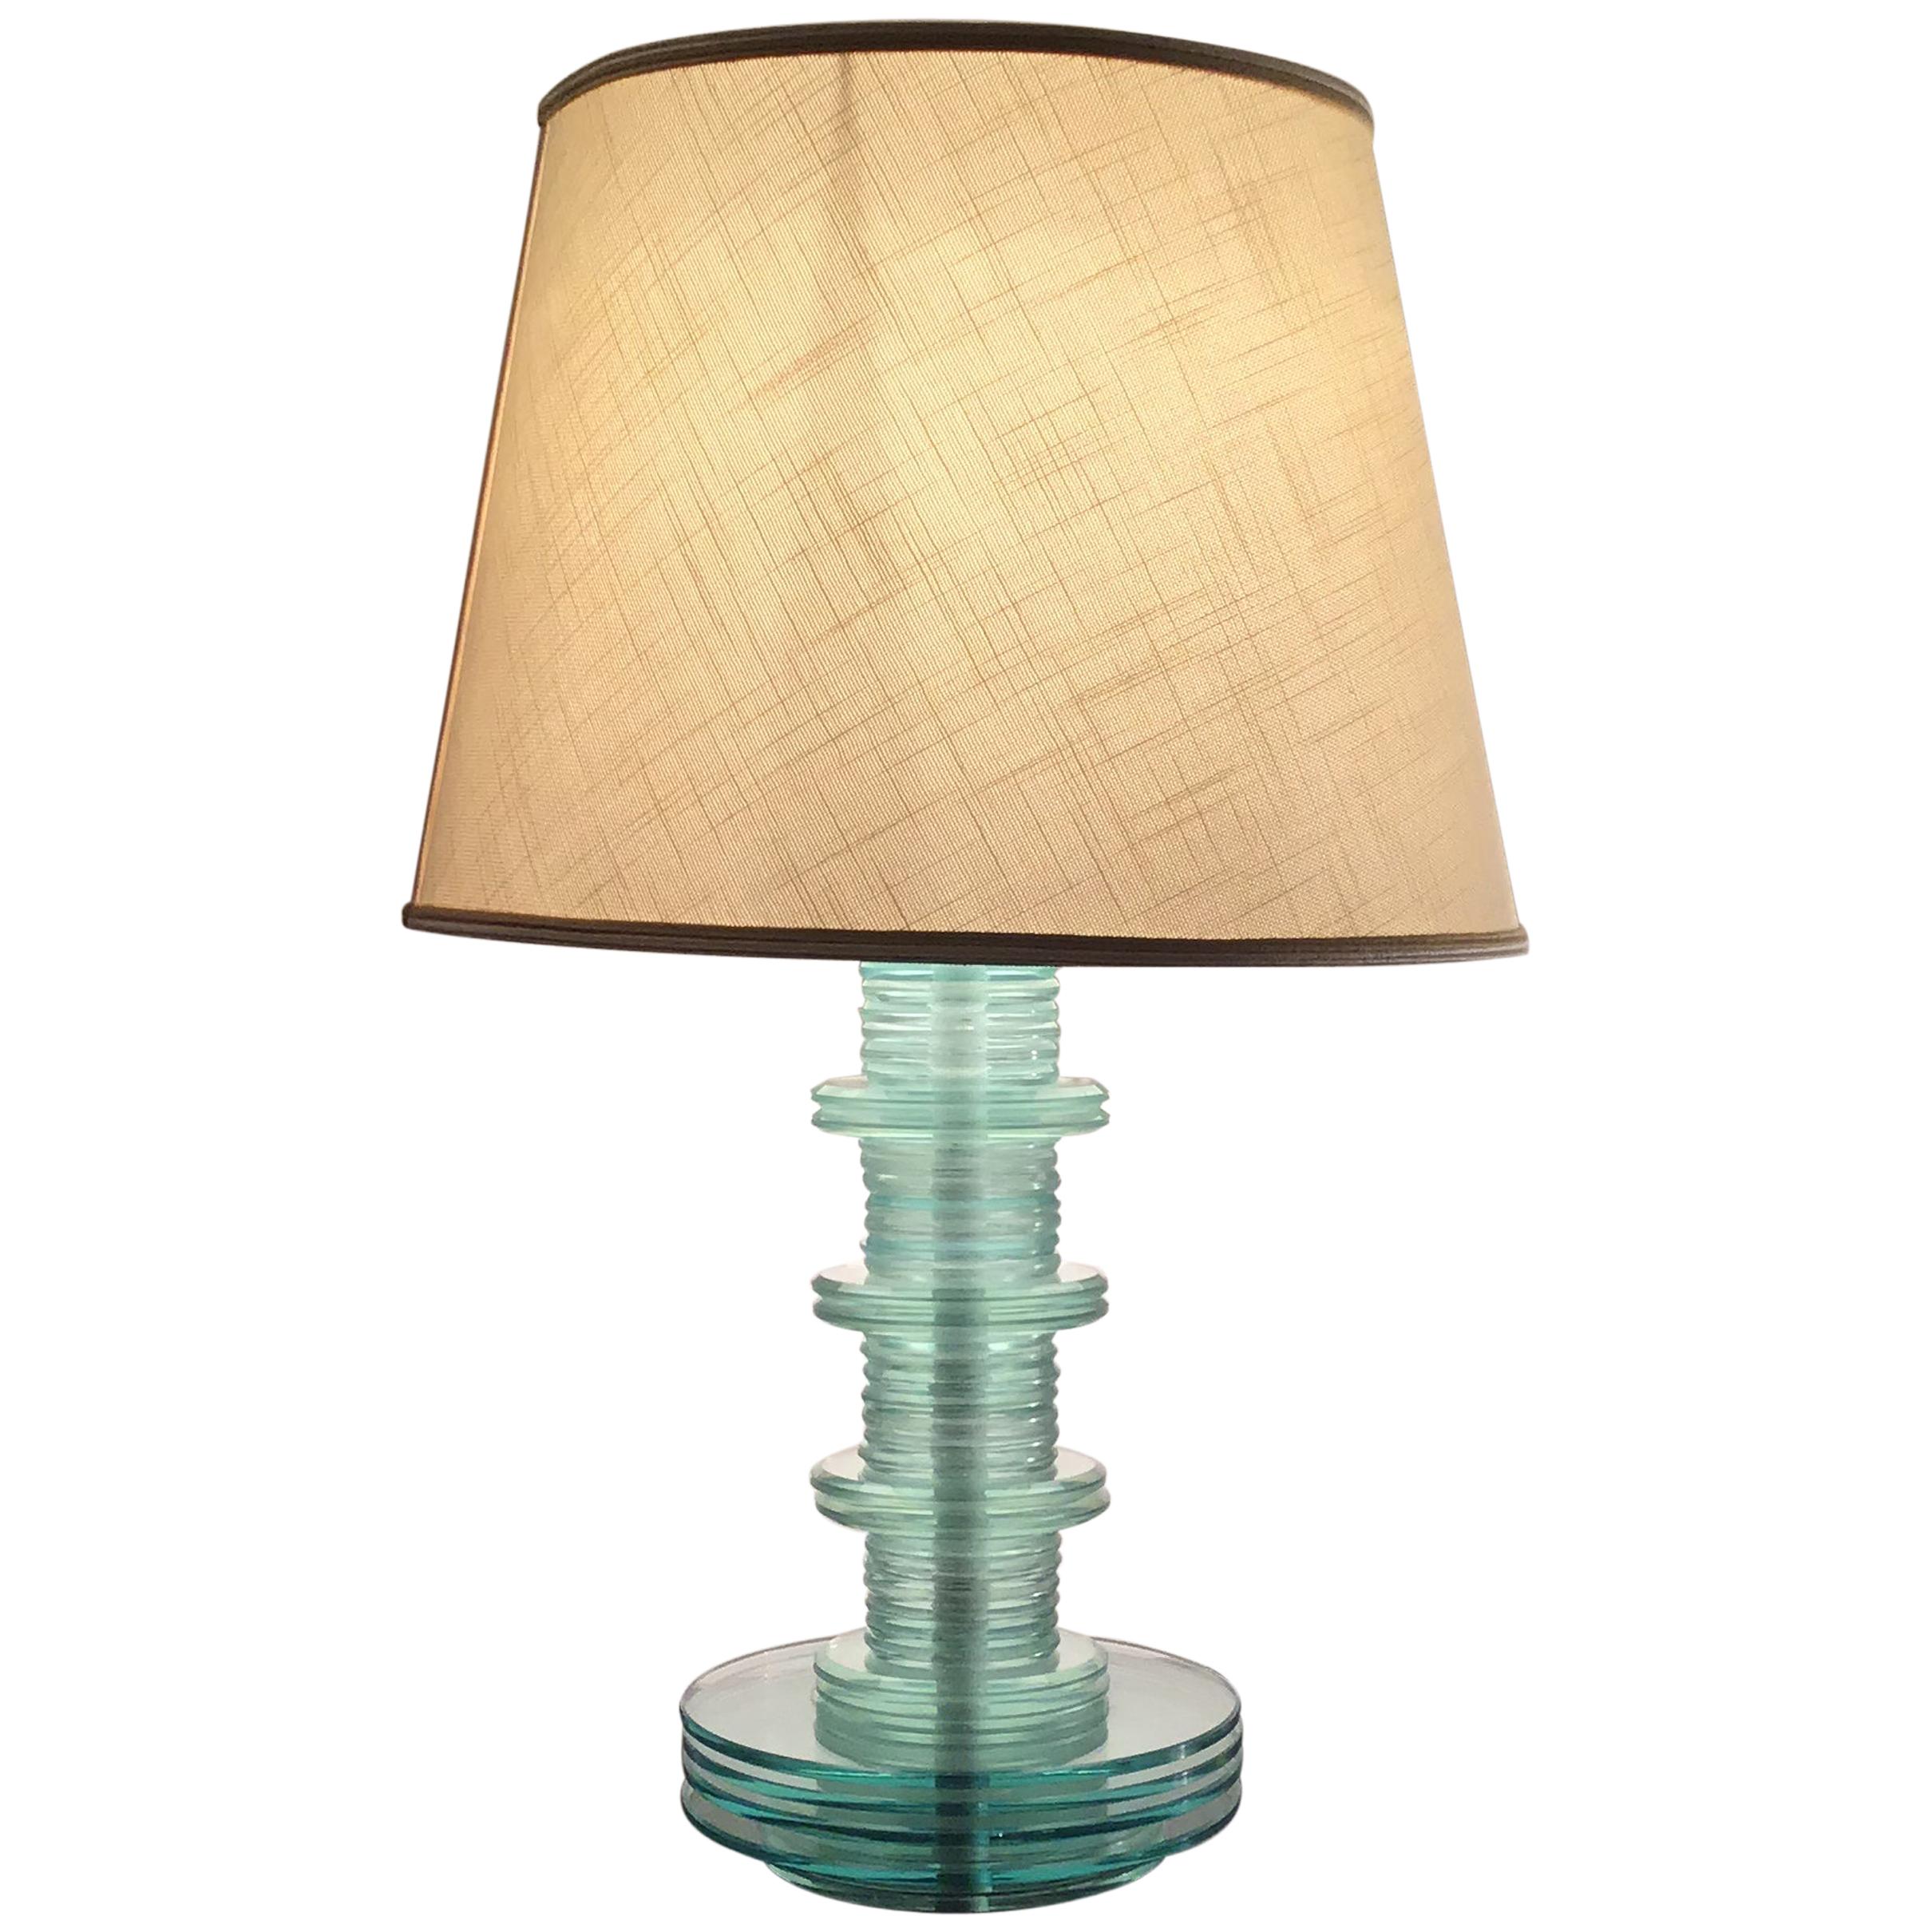 Cristal Art Table Lamp Glass Iron Fabric Lampshade, 1960, Italy